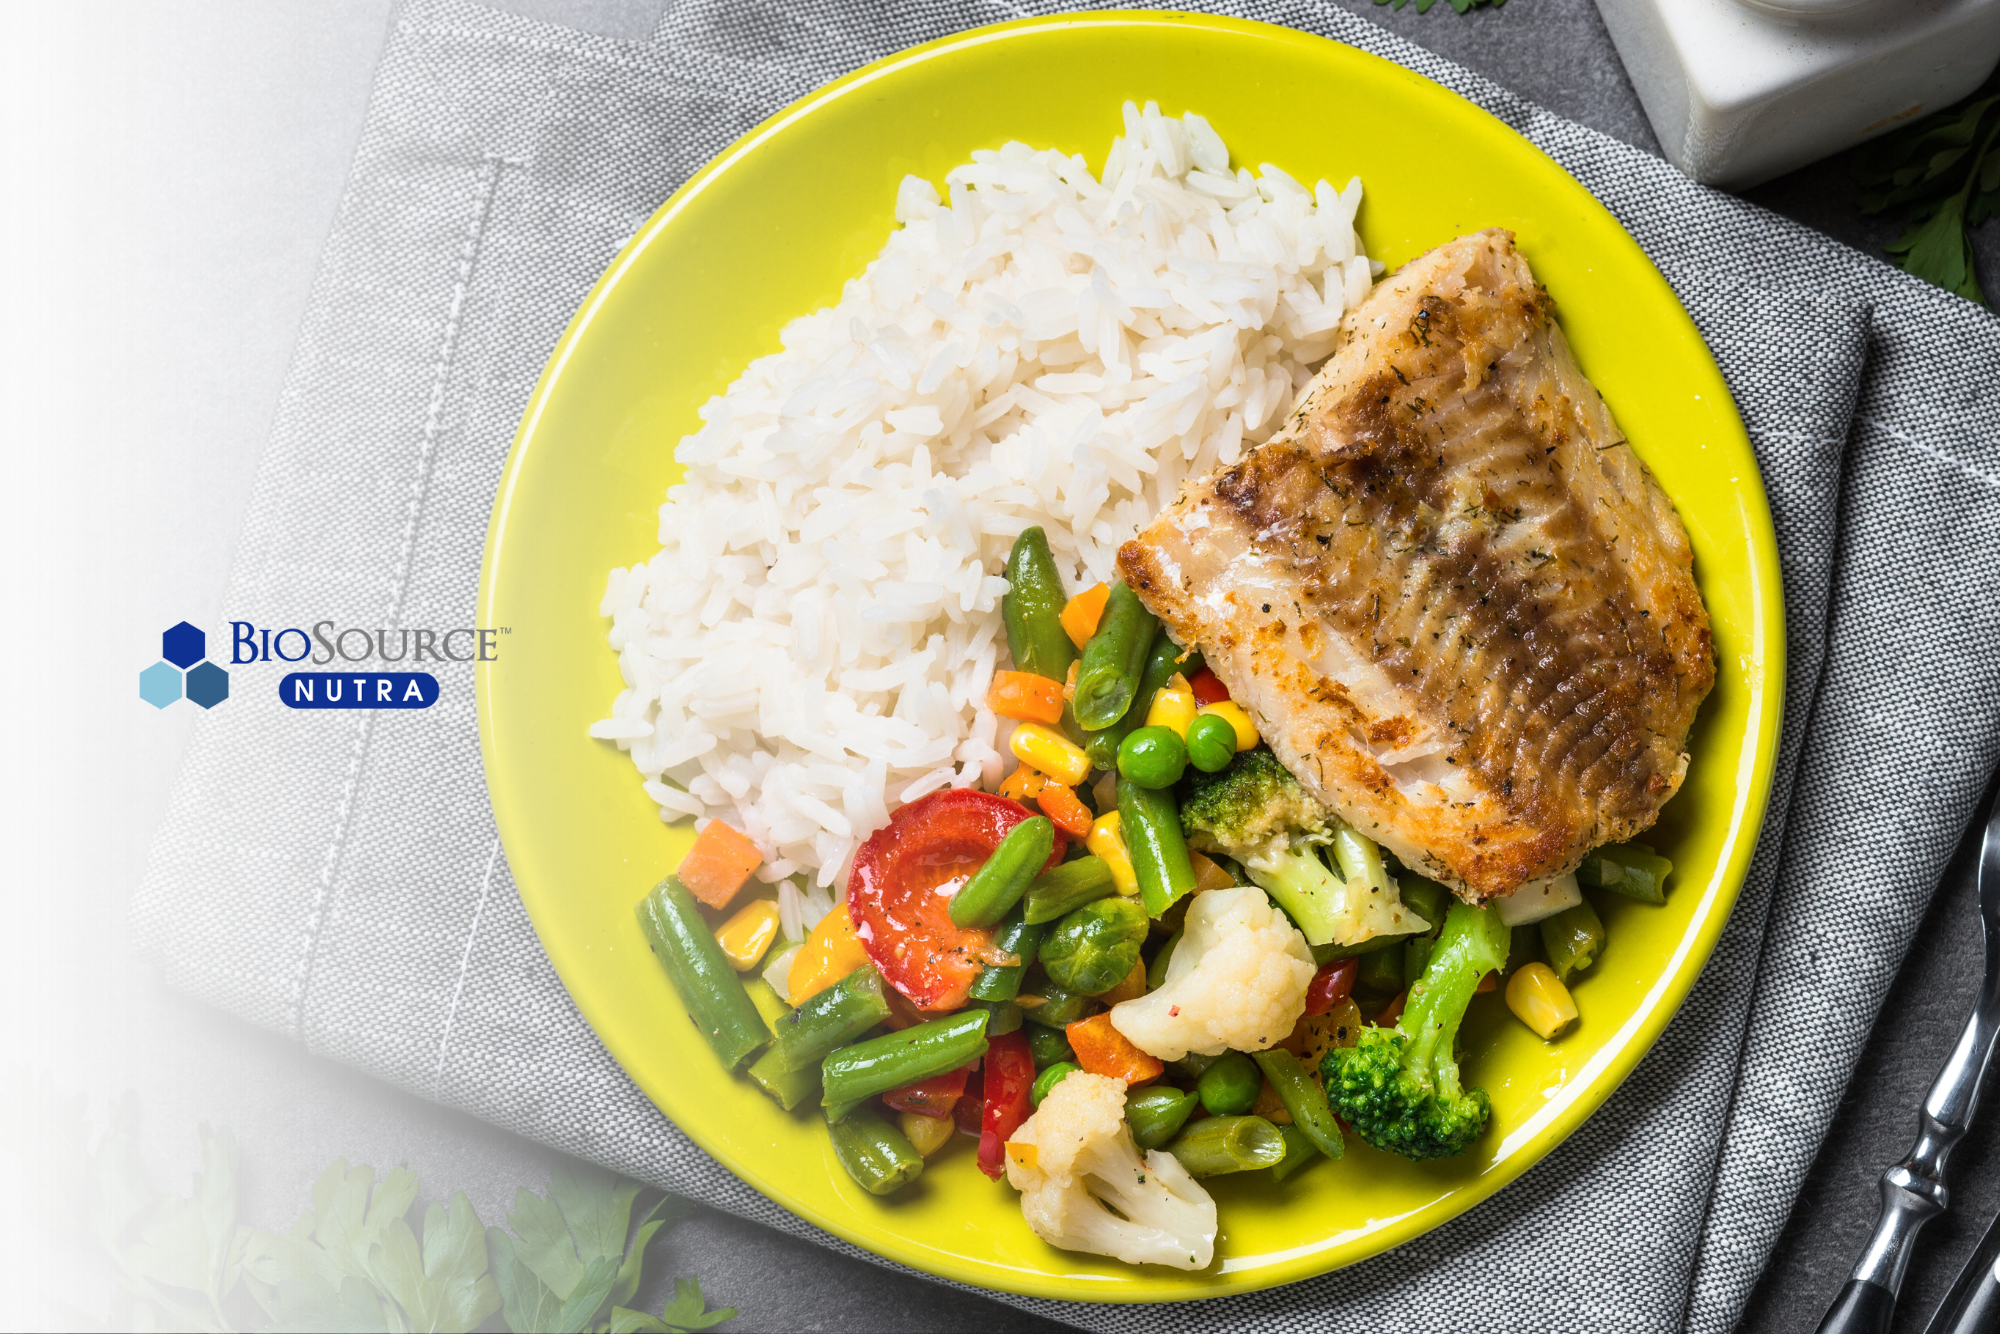 A yellow dinner plate with grilled fish, steamed veggies, and white rice